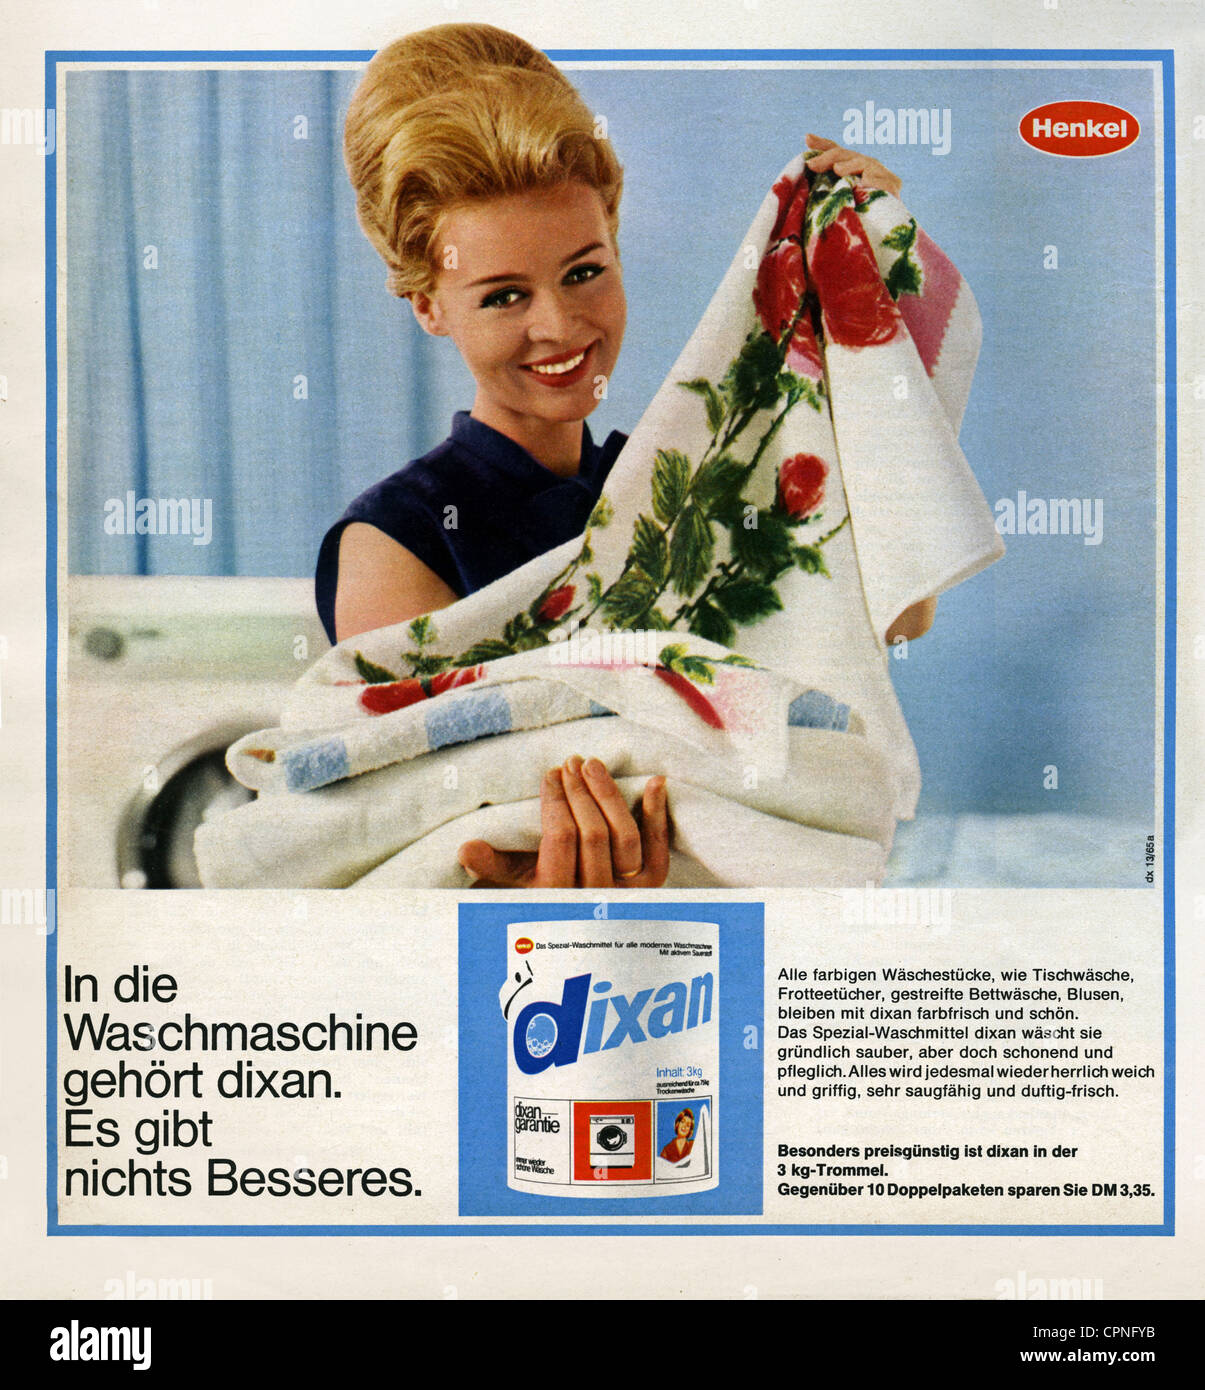 advertising, household, Dixan, washing powder, by Henkel, advertisement, Germany, 1965, Additional-Rights-Clearences-Not Available Stock Photo